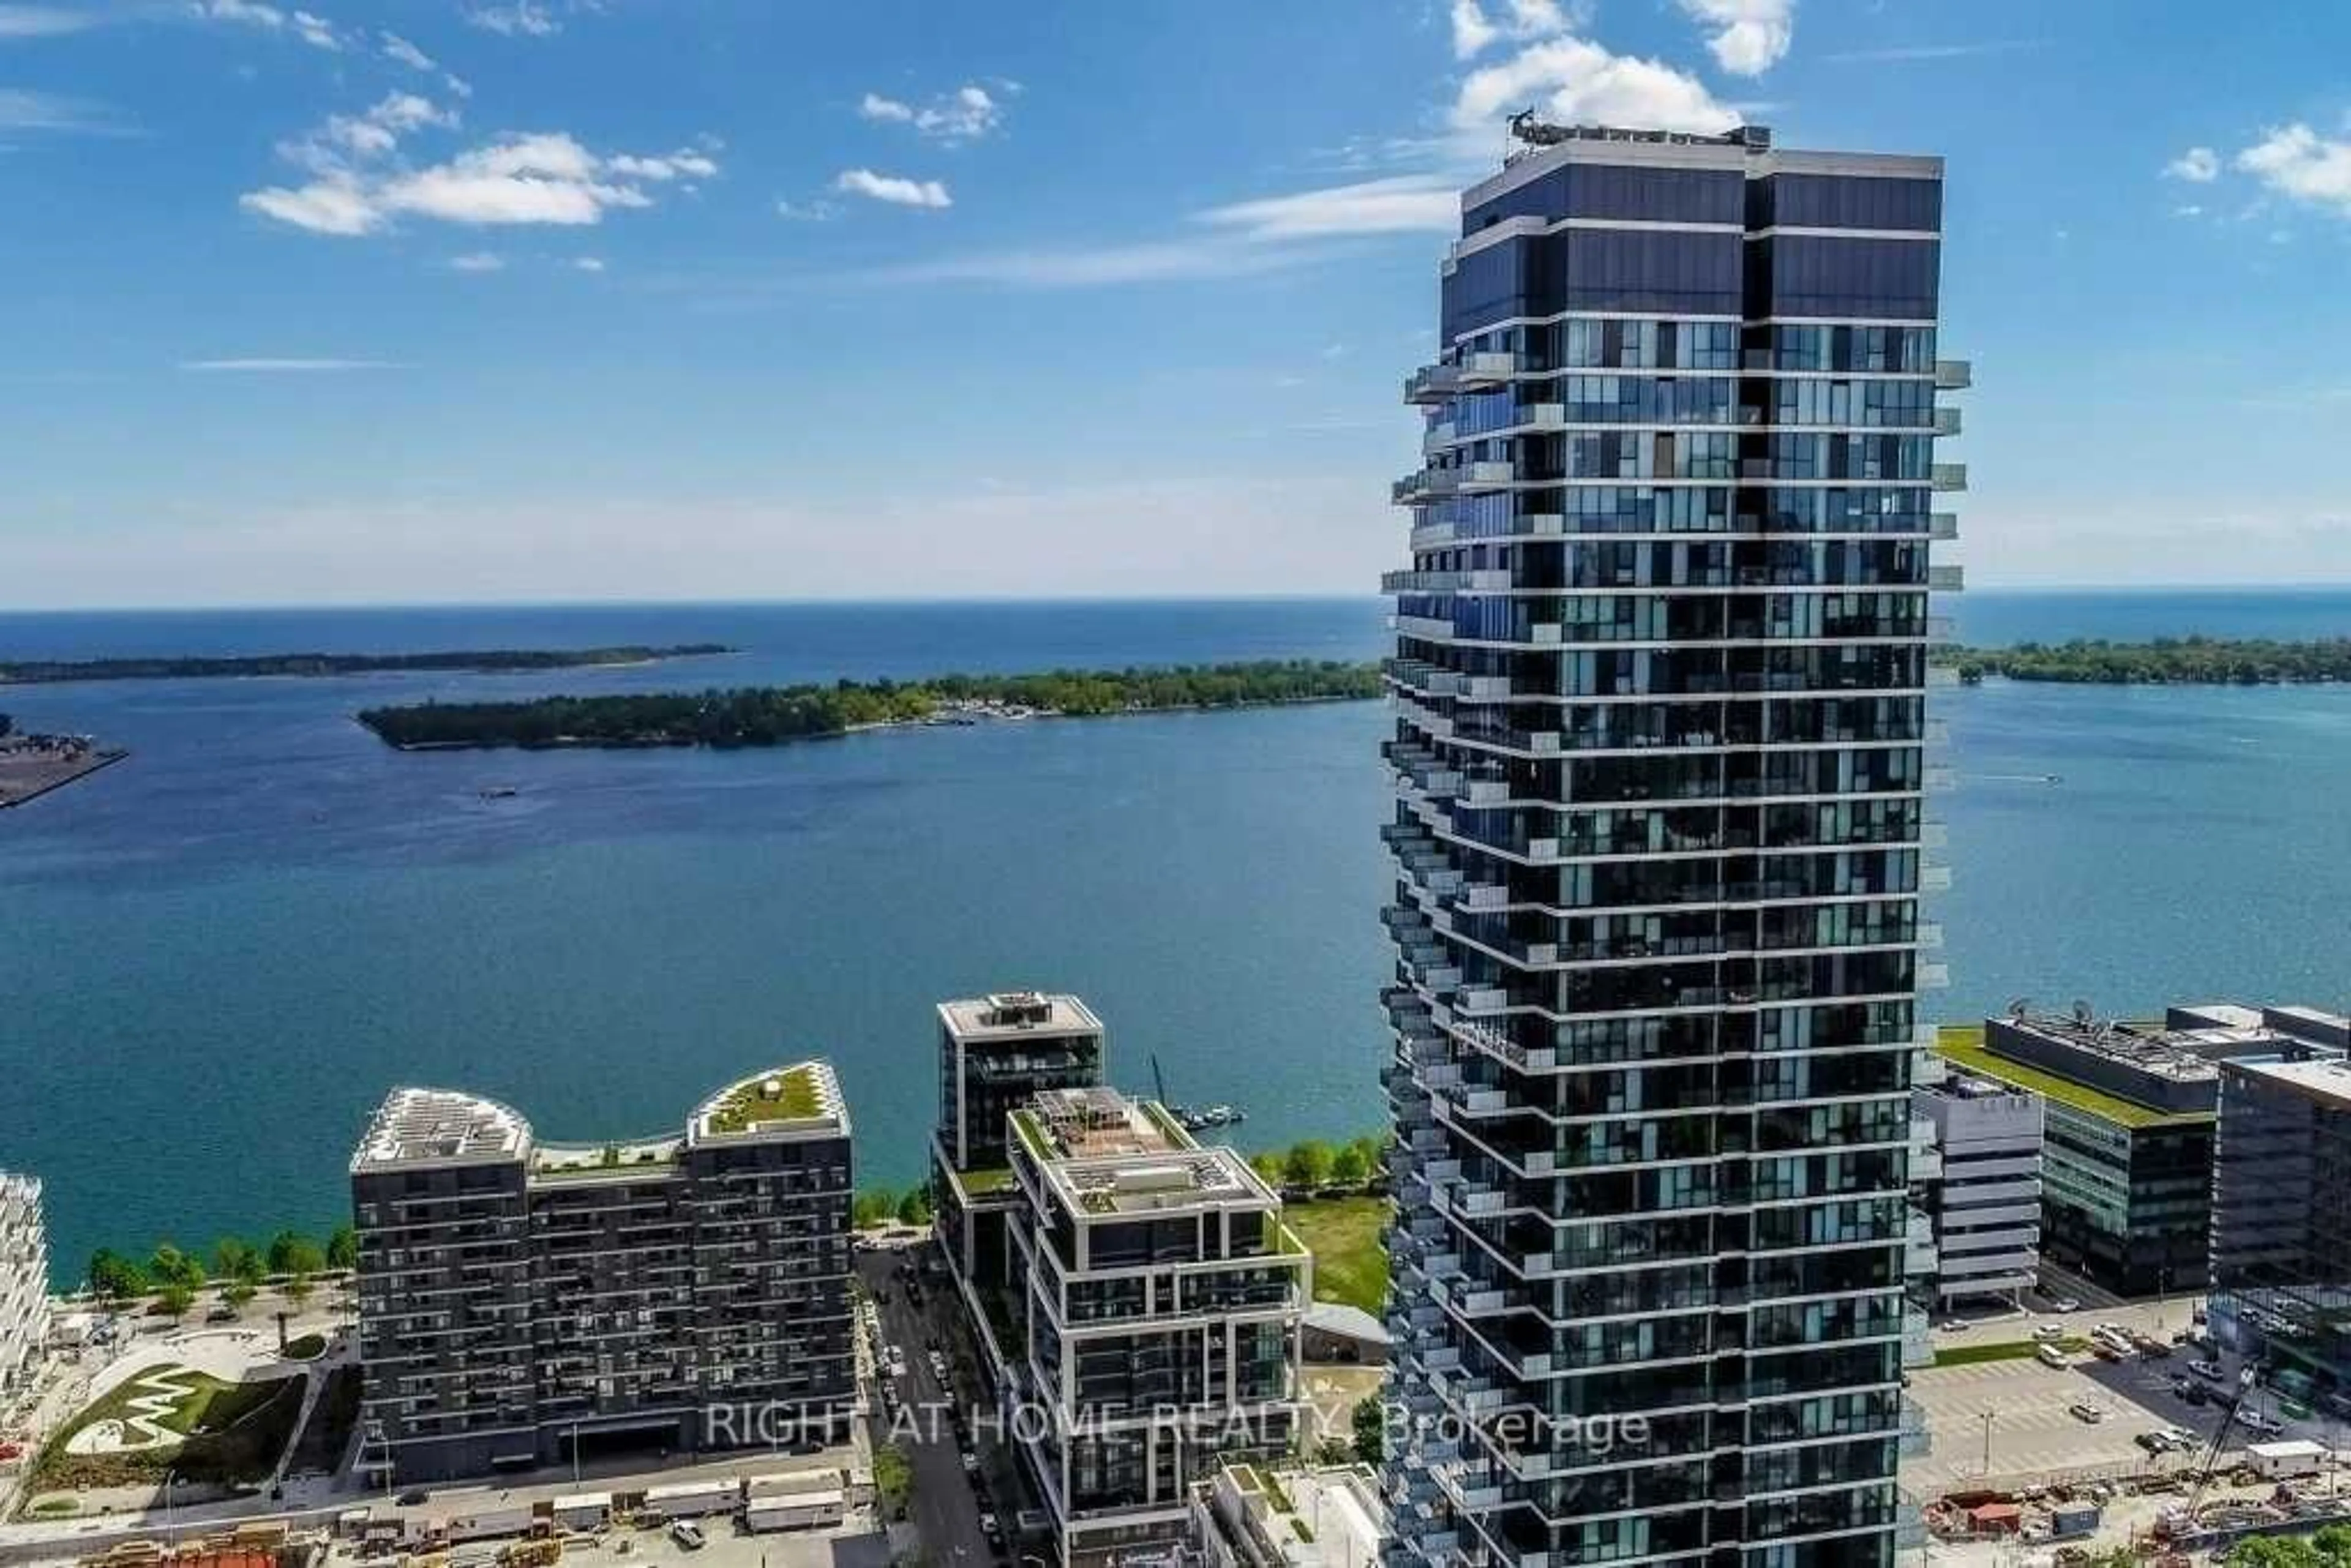 Lakeview for 16 Bonnycastle St #1407, Toronto Ontario M5A 0C9